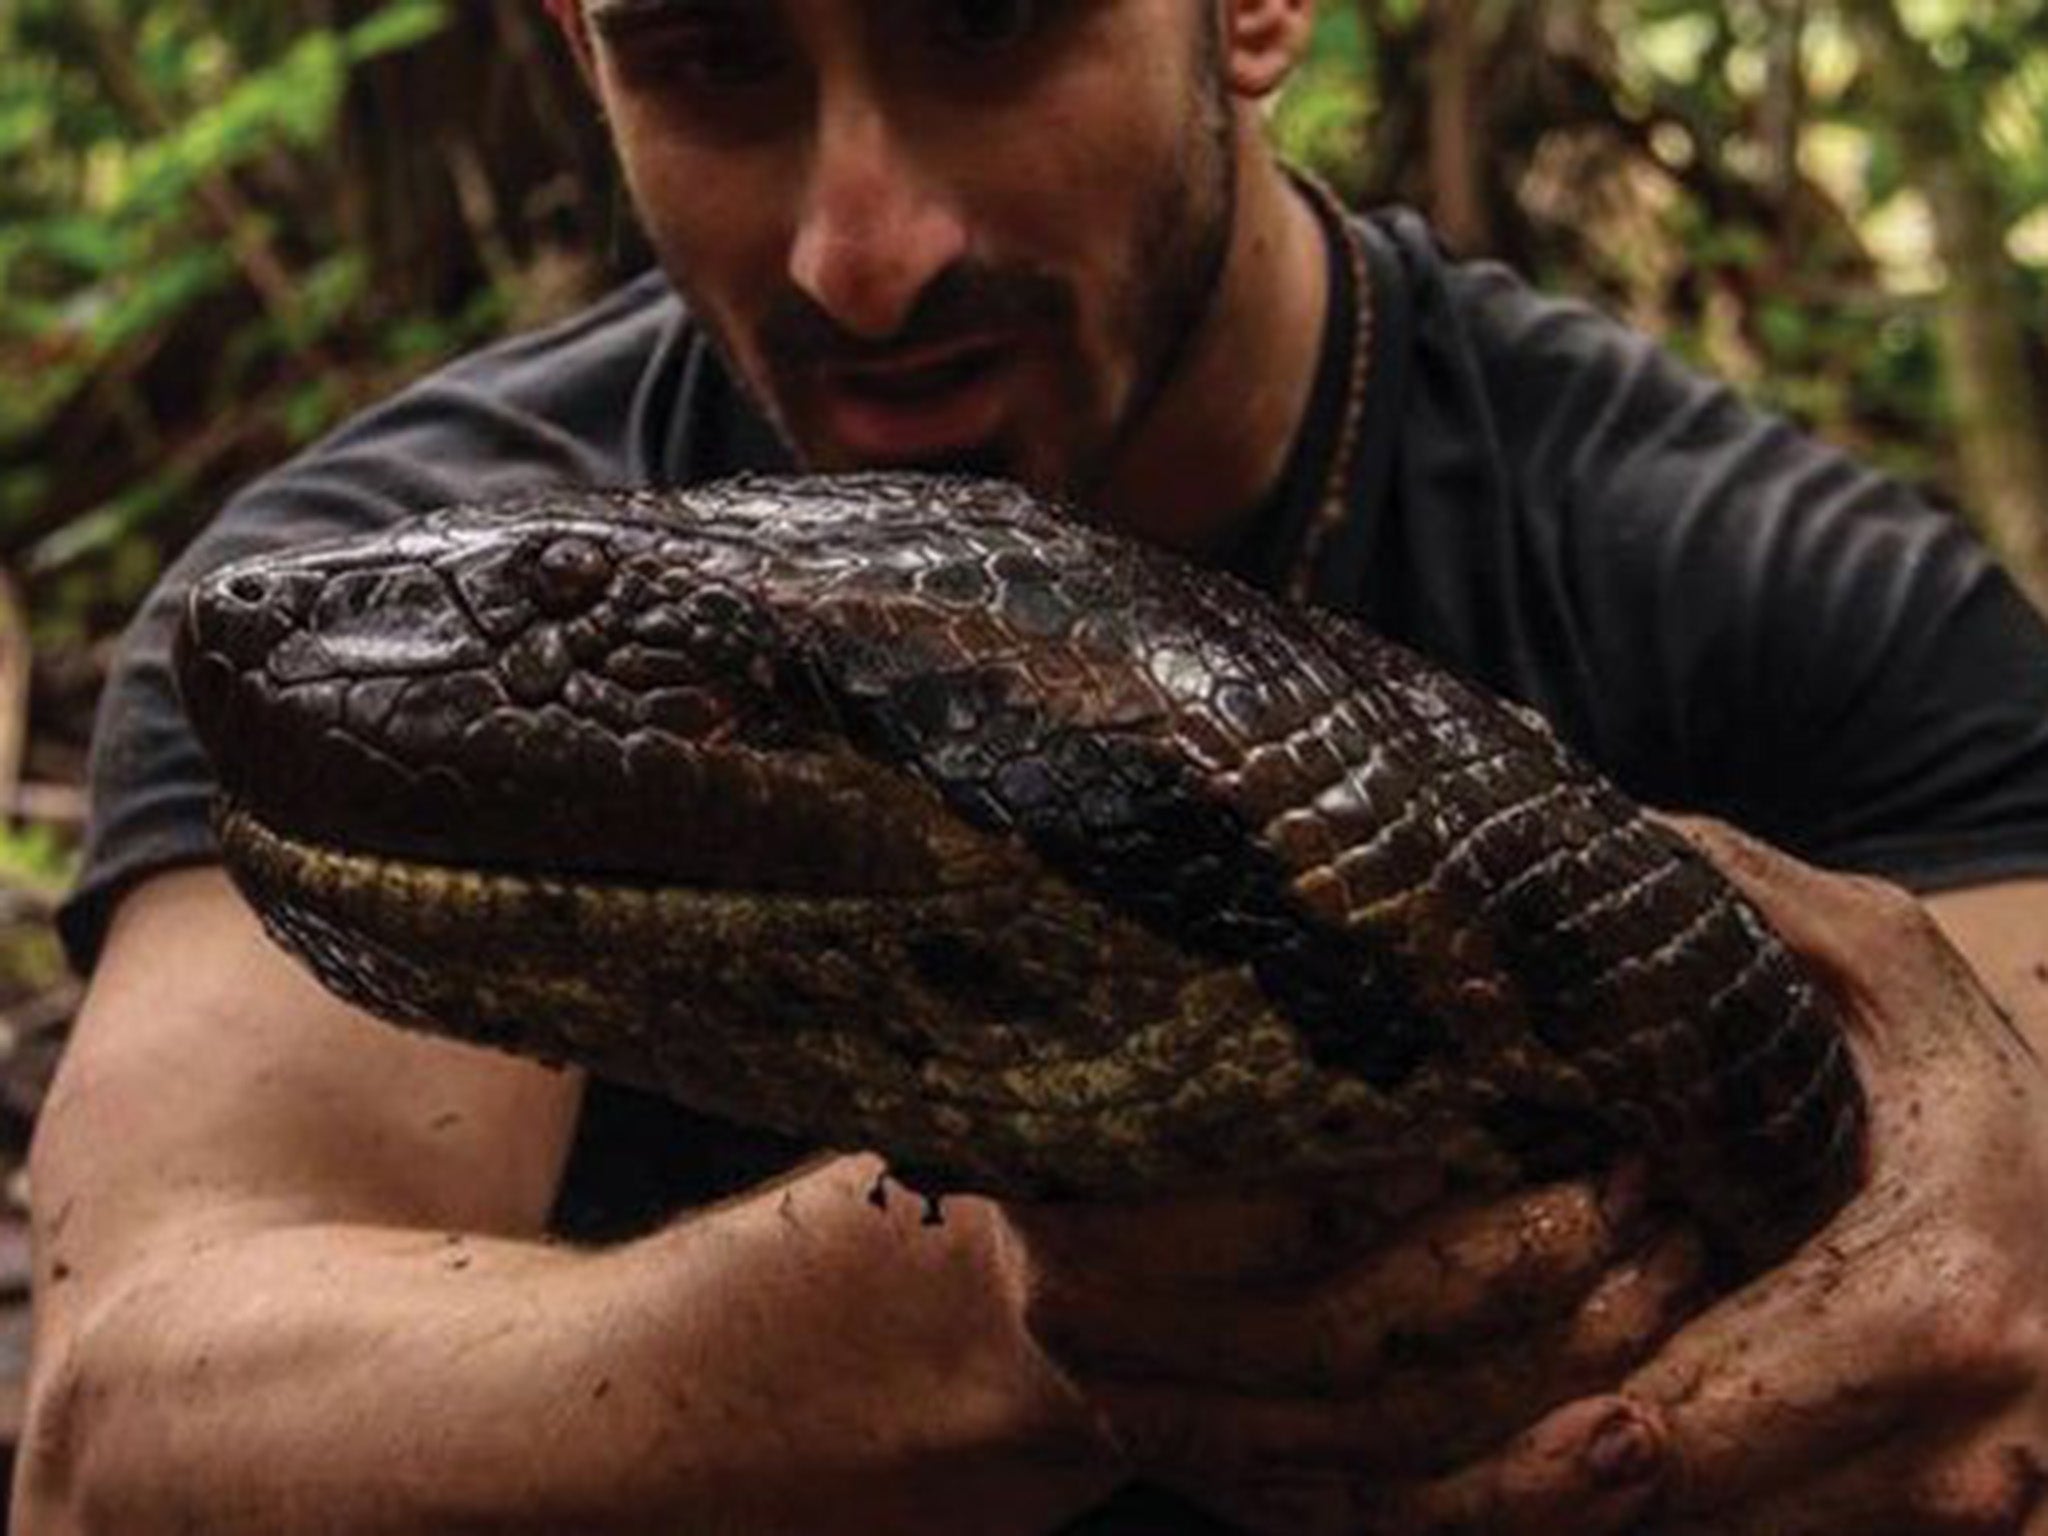 What Jimmy Kimmel asks Paul Rosolie to do is infinitely worse than being  eaten alive by an anaconda on TV | The Independent | The Independent